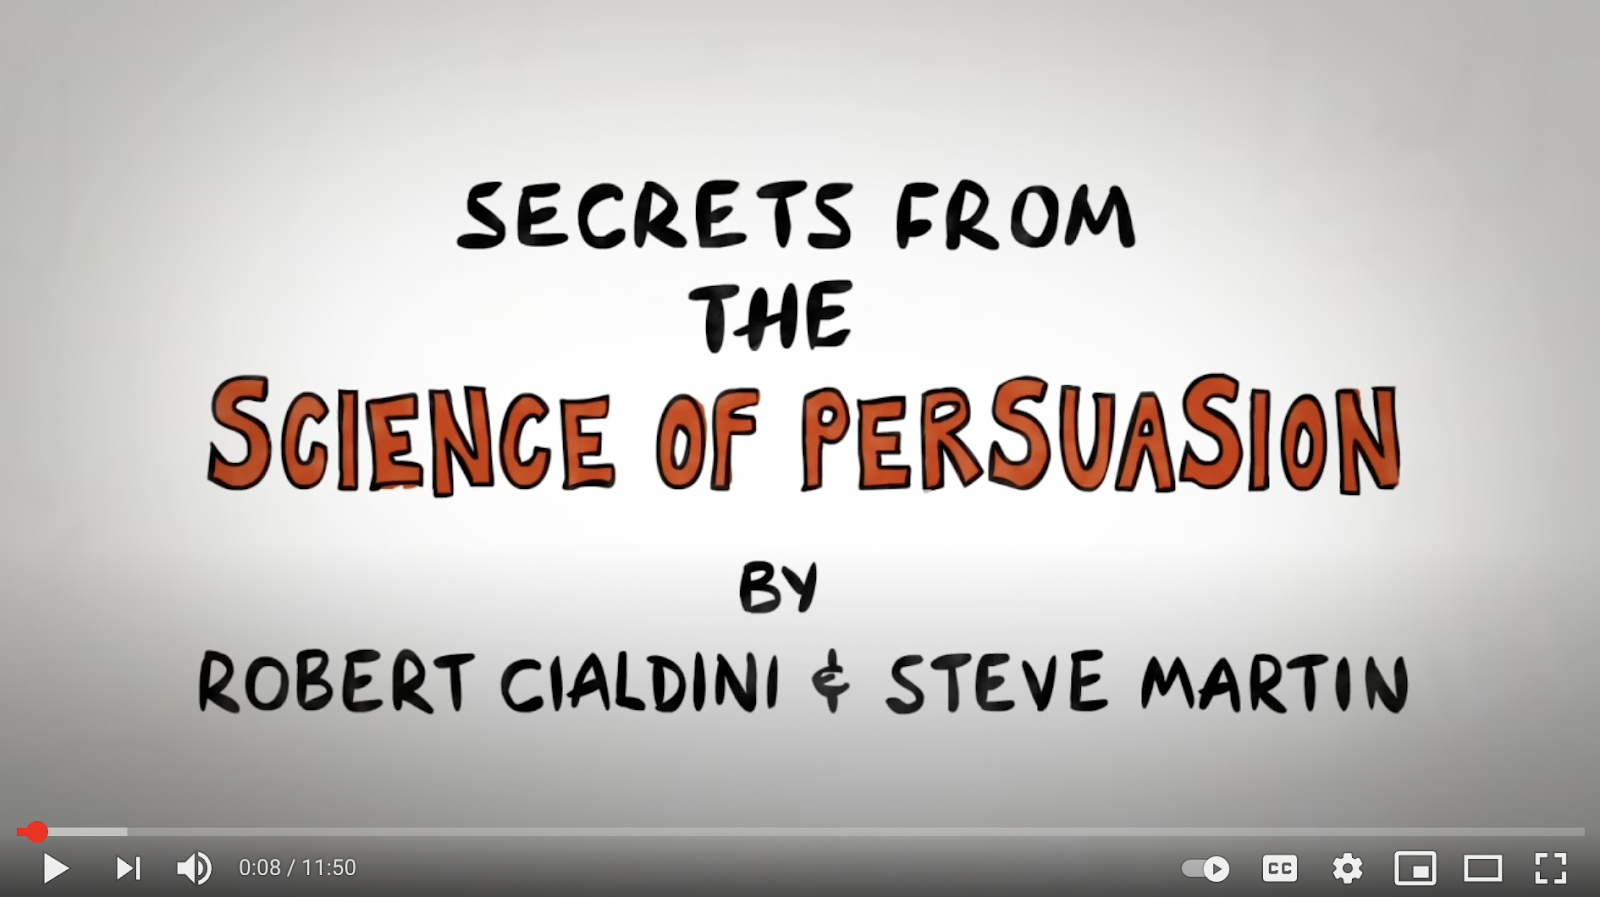 Secrets from the Science of Persuasion YouTube video